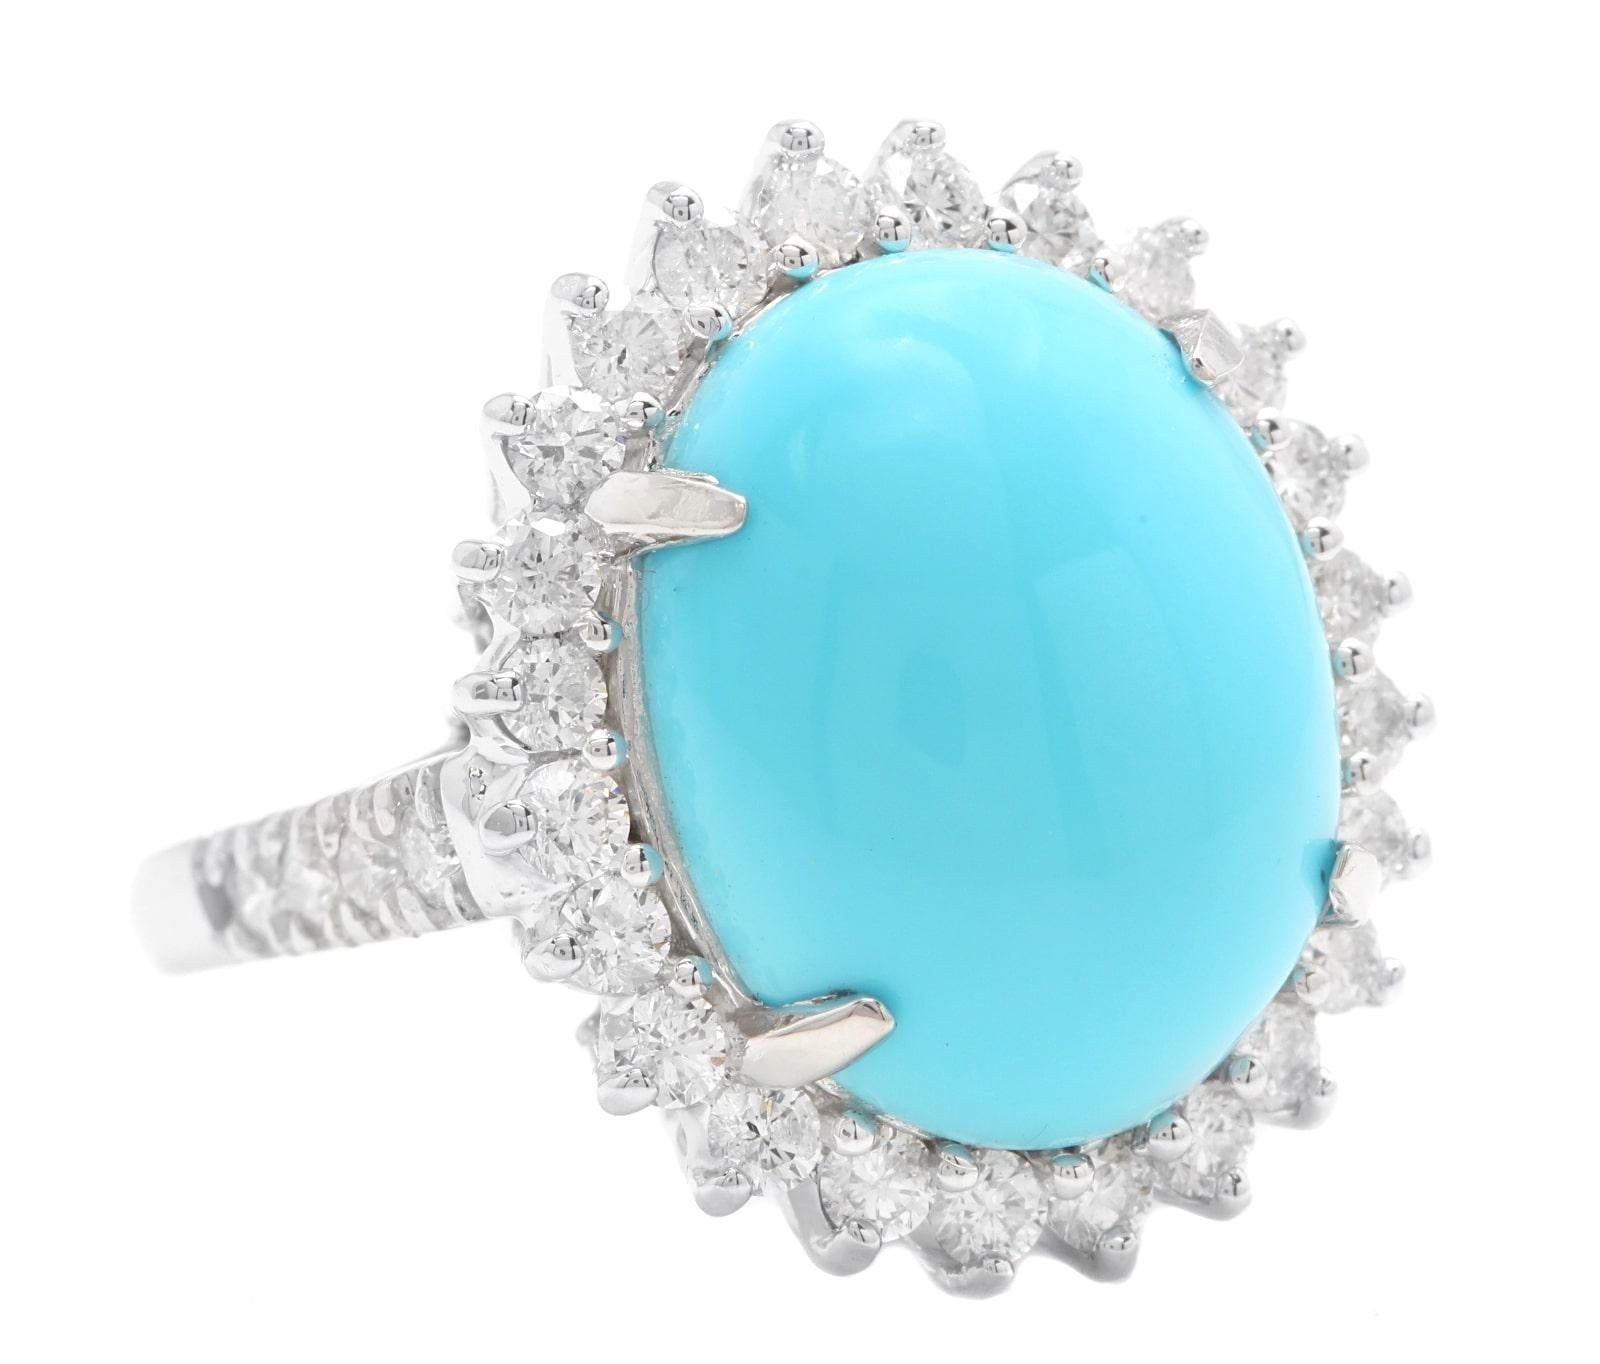 12.30 Carats Impressive Natural Turquoise and Diamond 14K White Gold Ring

Suggested Replacement Value $6,500.00

Total Natural Oval Turquoise Weight is: Approx. 11.00 Carats 

Turquoise Measures: 17.00 x 13.00mm 

Natural Round Diamonds Weight: